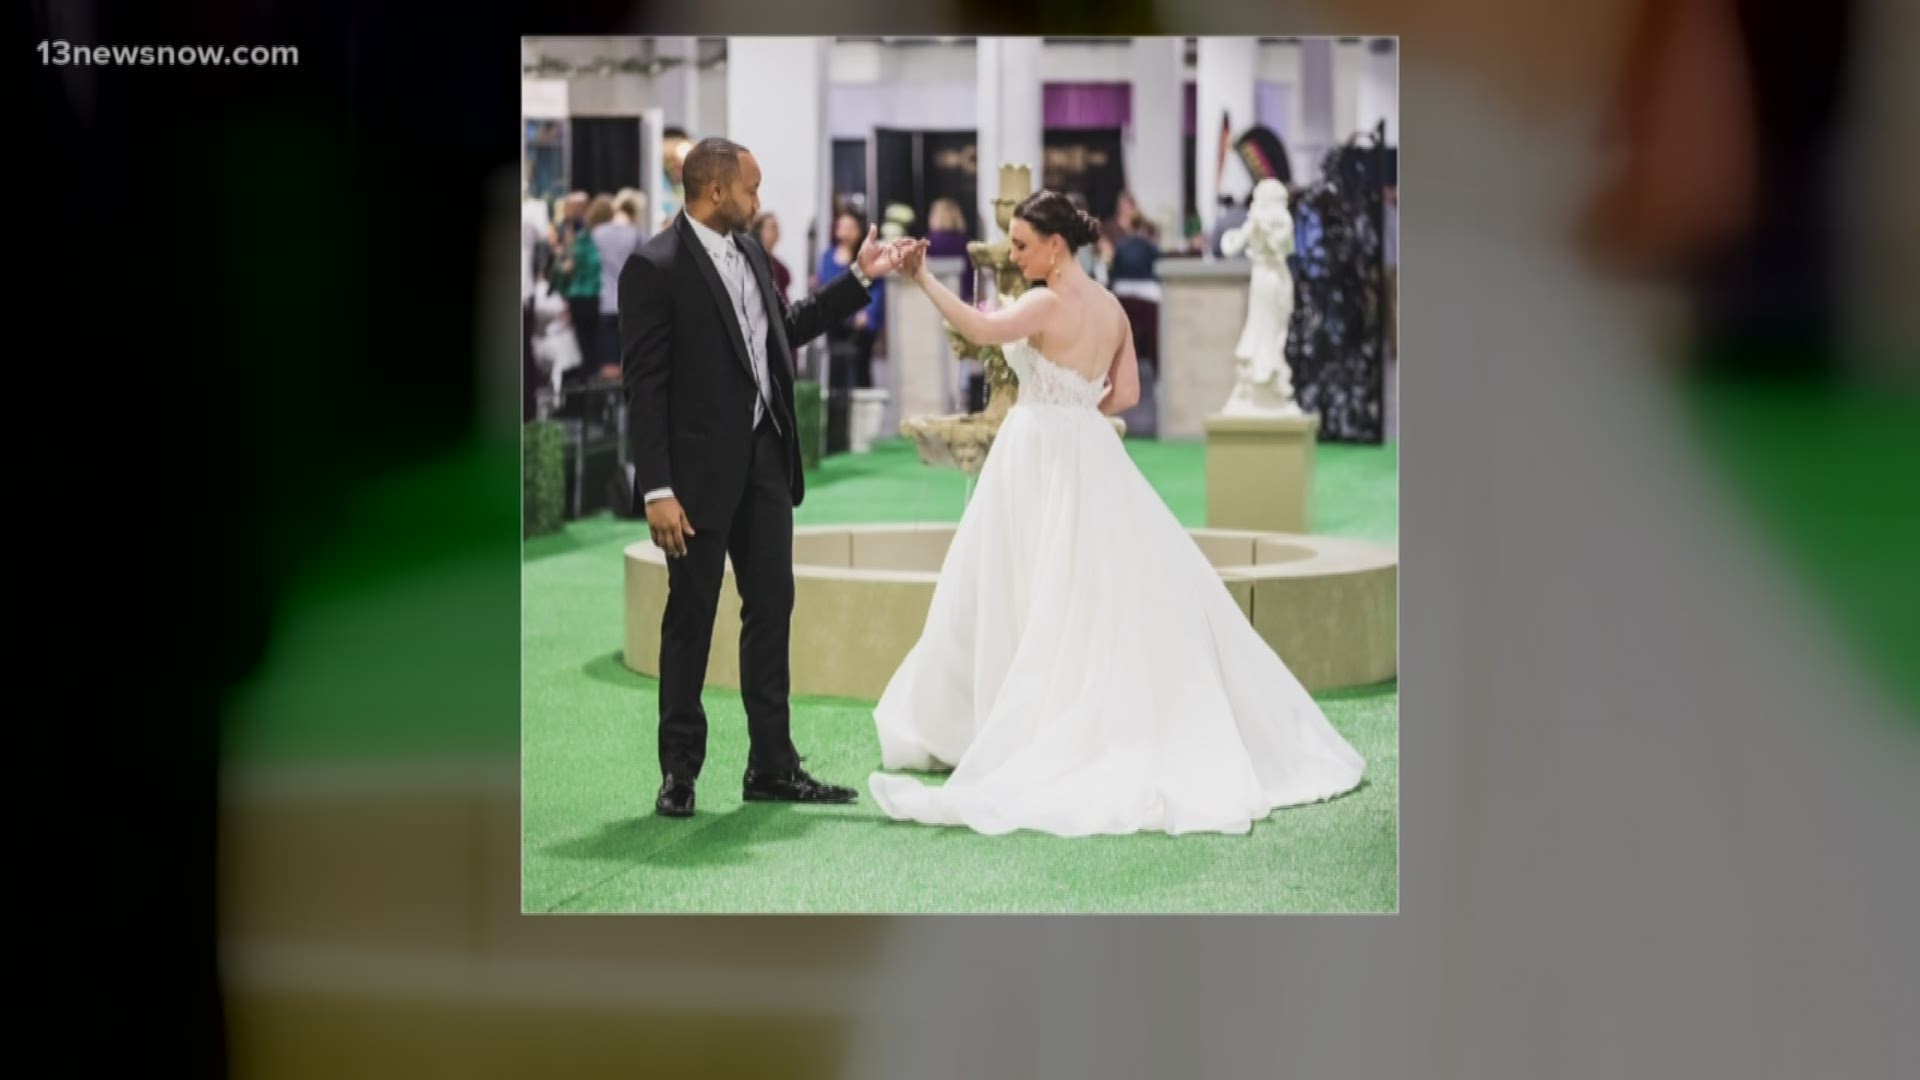 Did you, or someone you love, recently get engaged? Well, the longest-running and most anticipated annual bridal event in Virginia is coming to Scope.